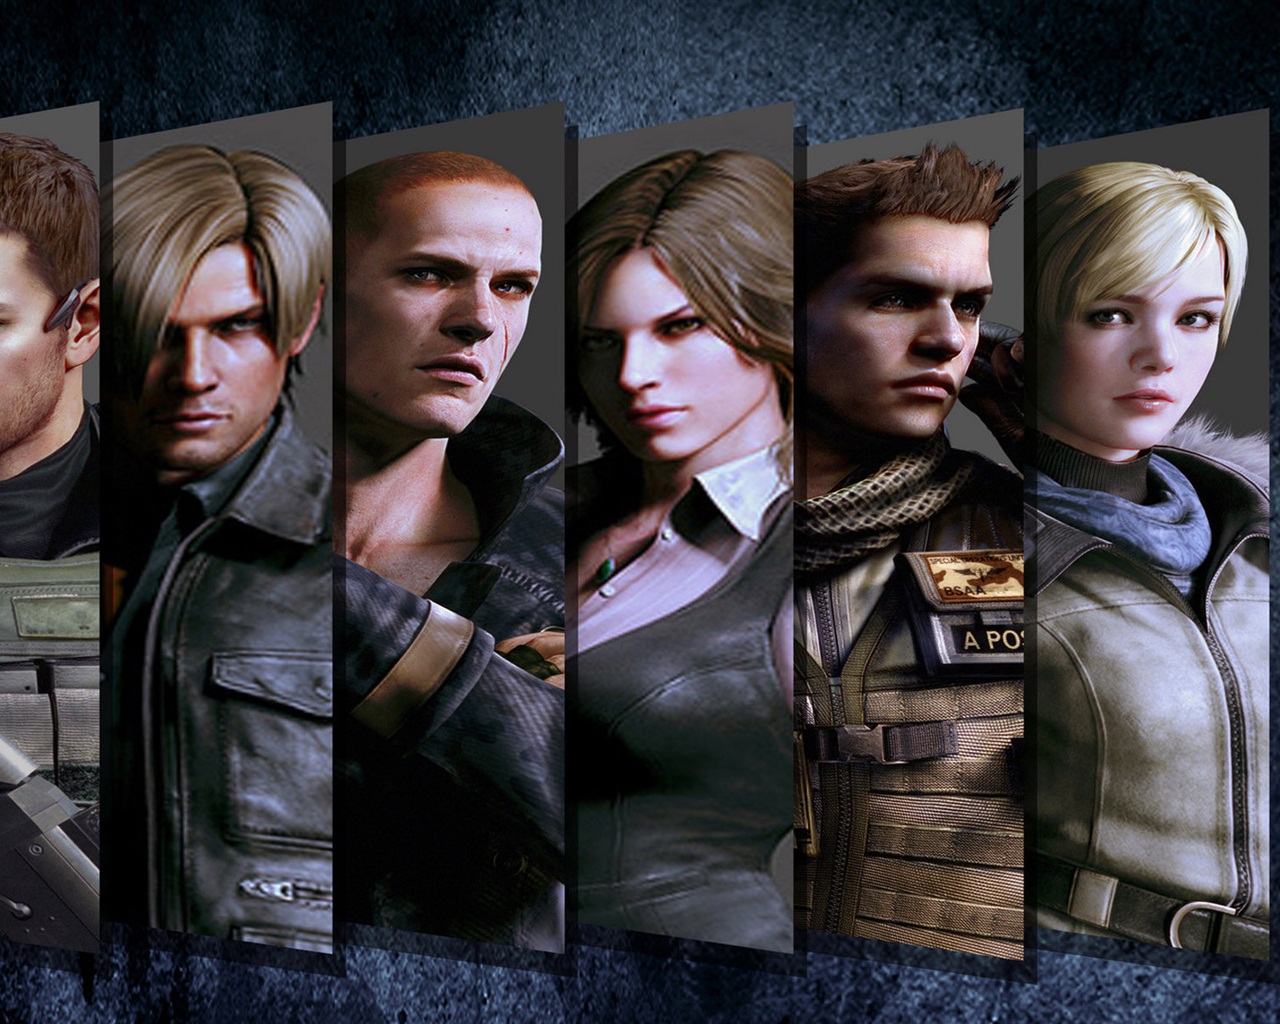 Resident Evil 6 HD game wallpapers #2 - 1280x1024